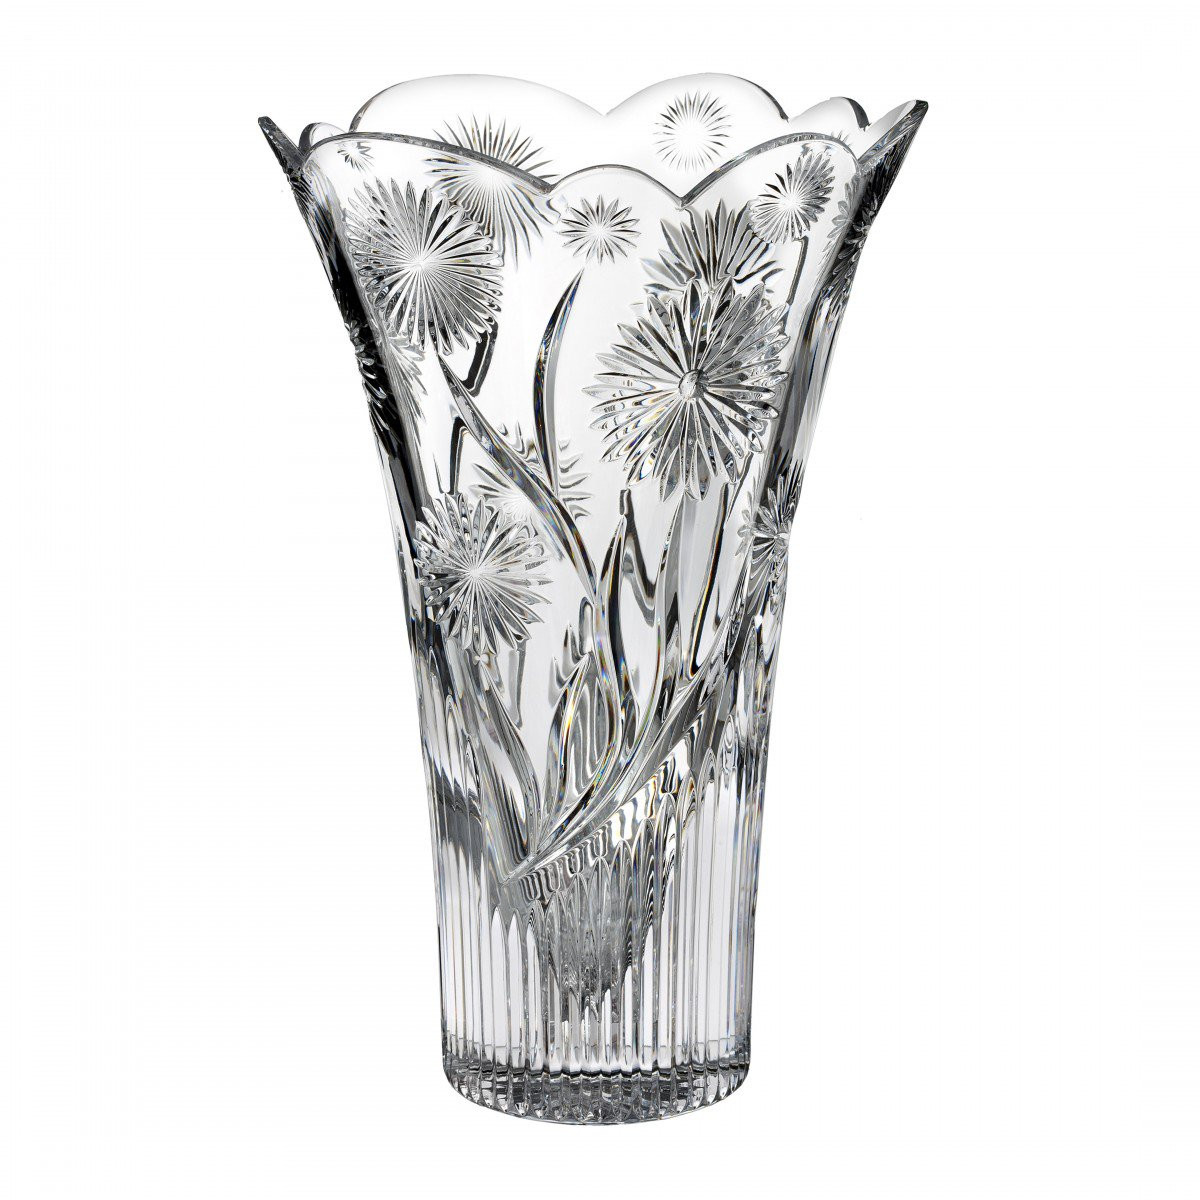 22 Stylish Waterford Maritana Vase 2024 free download waterford maritana vase of billy briggs daisy 12in vase discontinued house of waterford throughout billy briggs daisy 12in vase discontinued